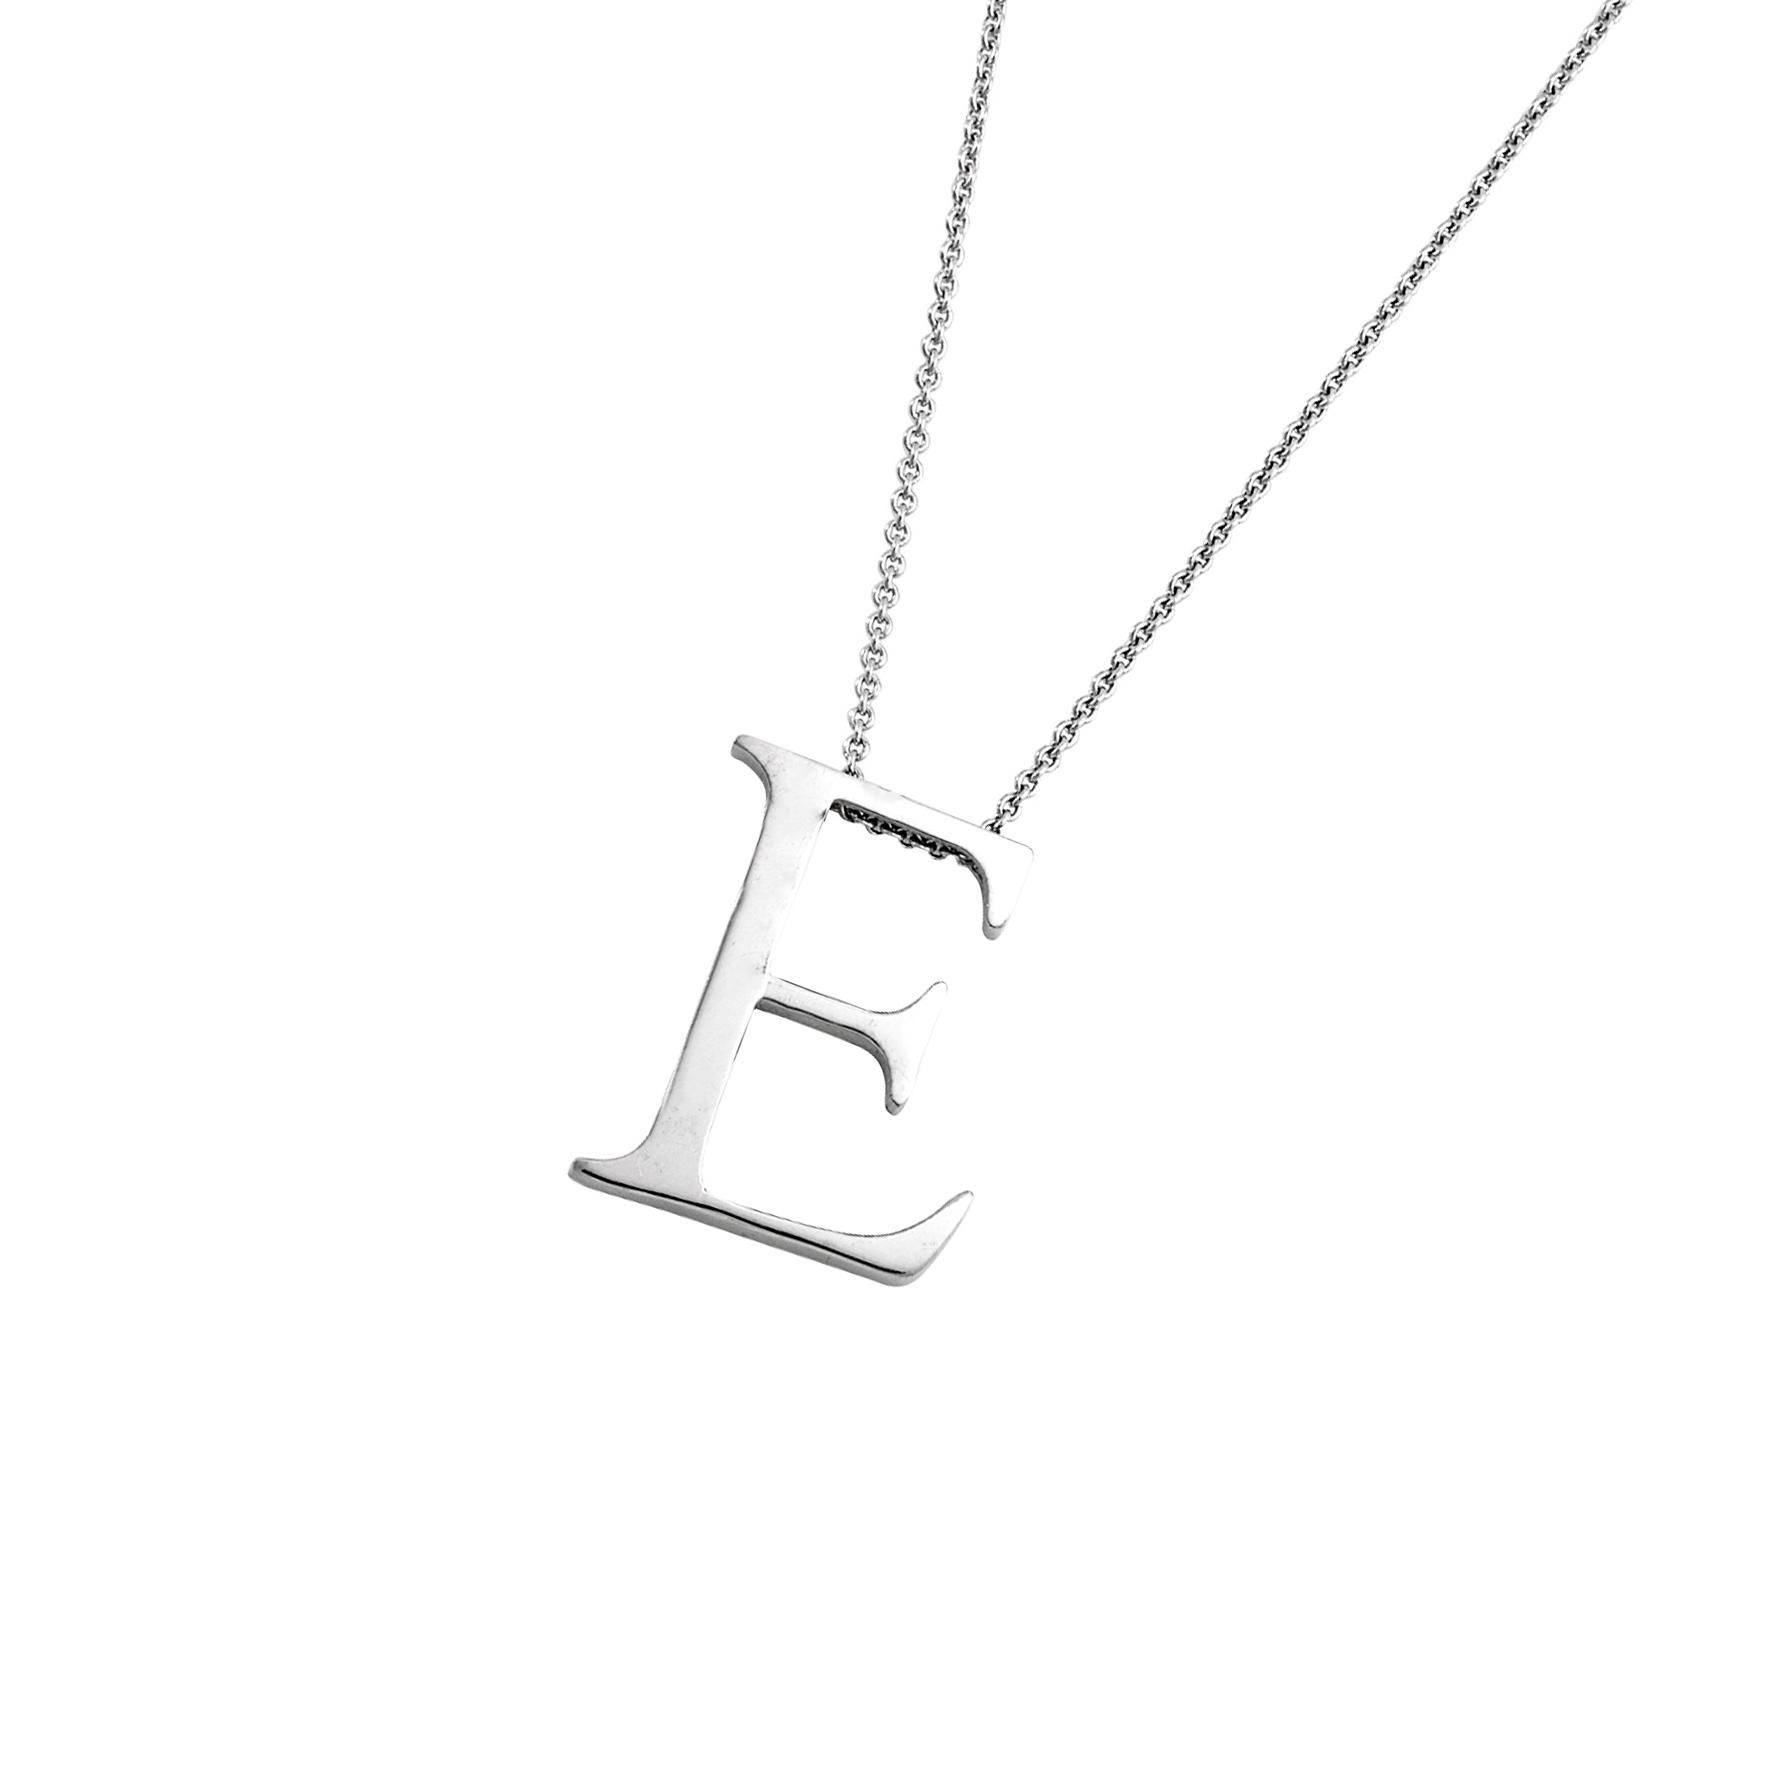 Giulians contemporary 18 karat white gold letter pendant.  This pendant features the letter E in a serif style font, with a flat profile and a polished finish.  The 18k 1mm trace chain runs through the top of the E, measuring 50 cm (19.6 inches) in